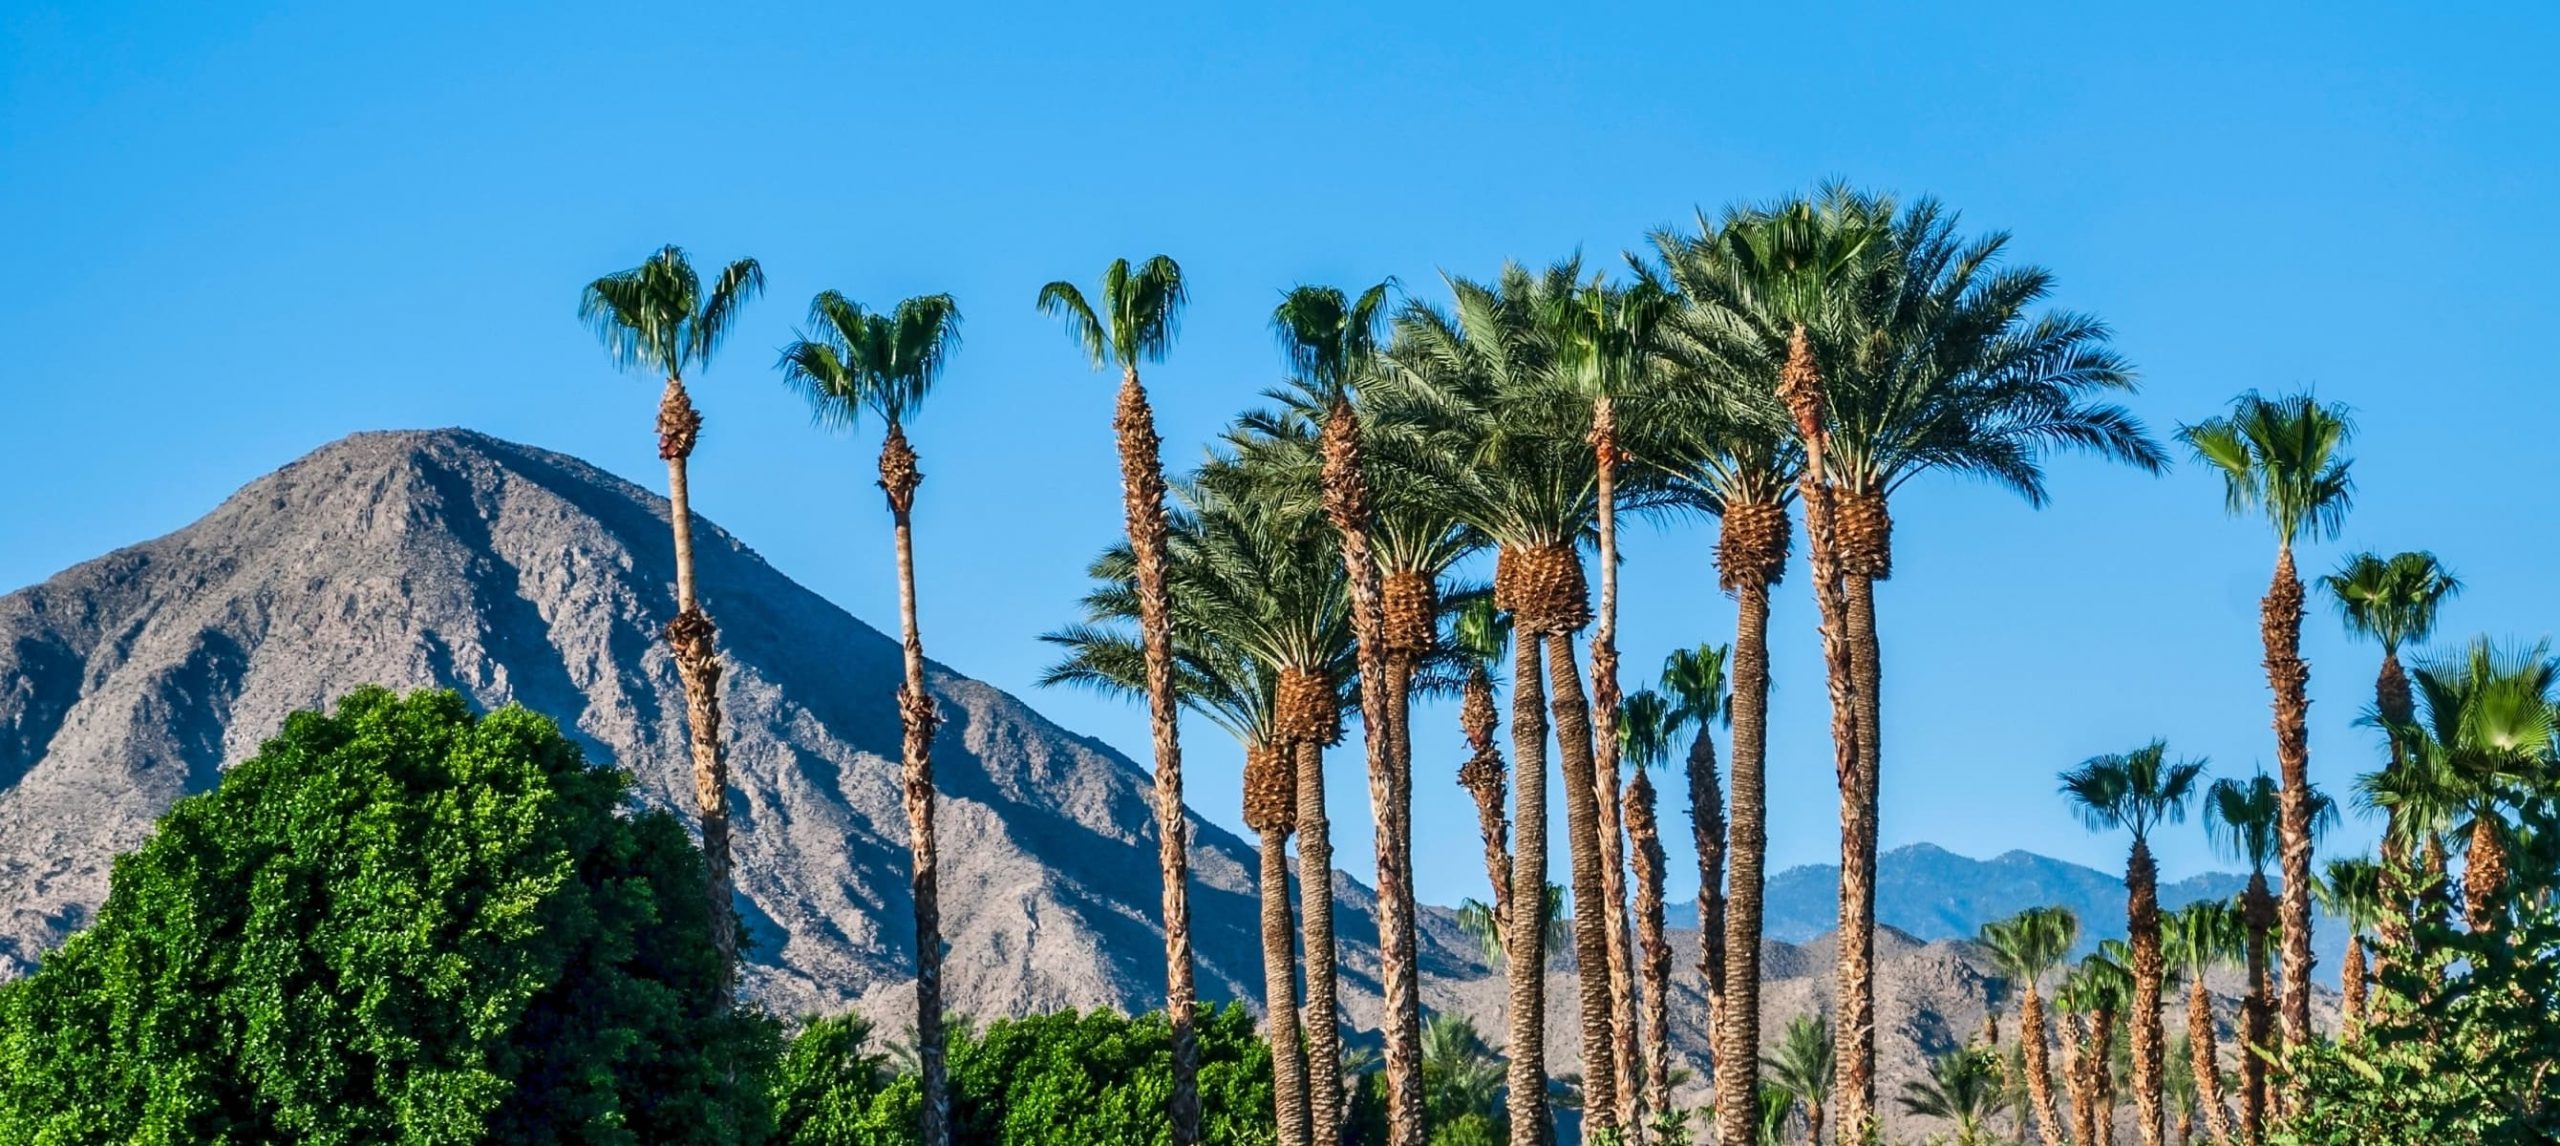 The Best Hotels In Palm Springs Area, California